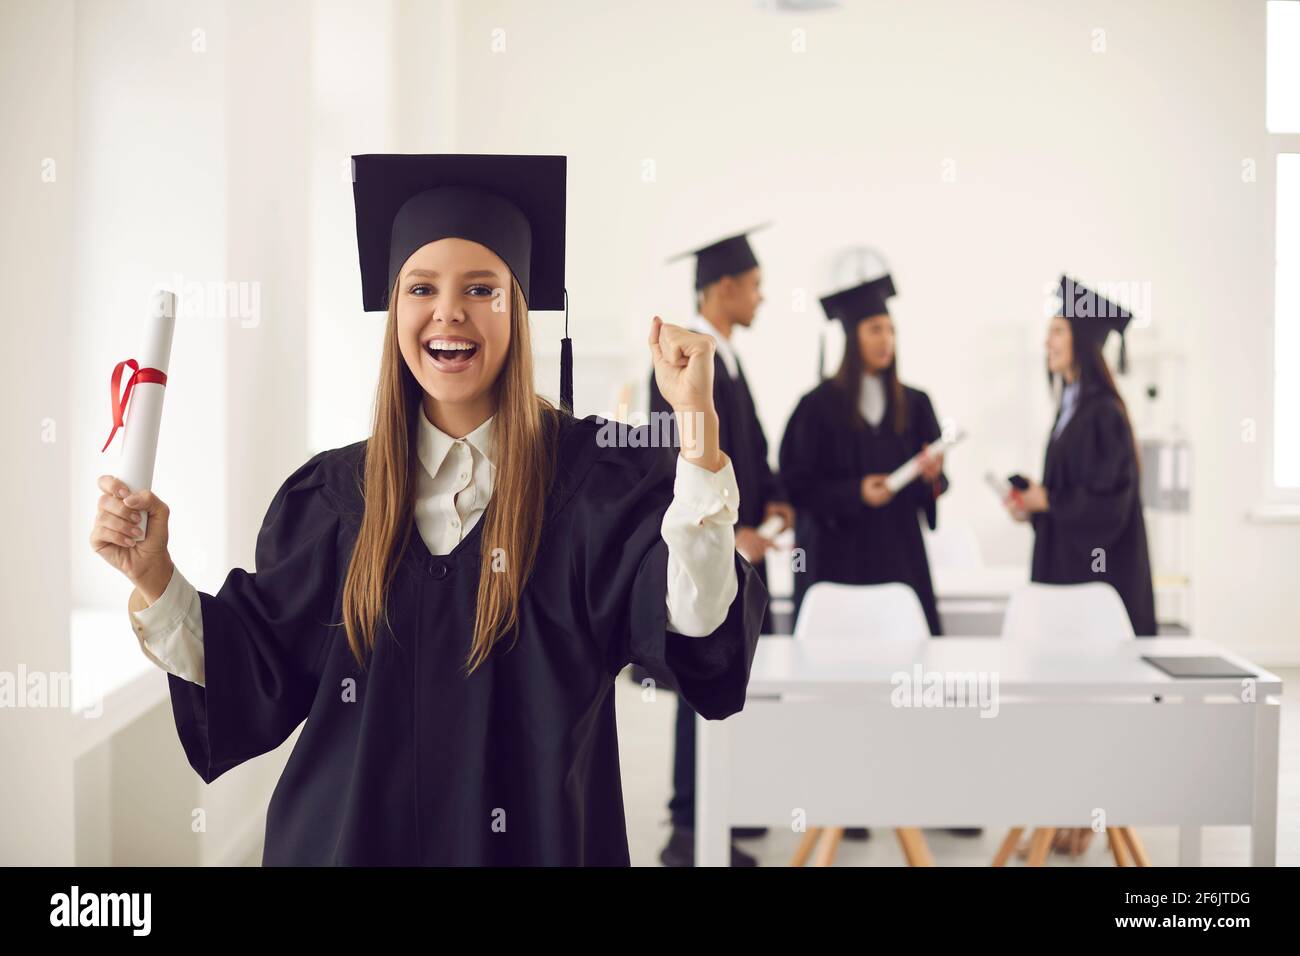 Excited student holding her diploma and celebrating college or university graduation Stock Photo